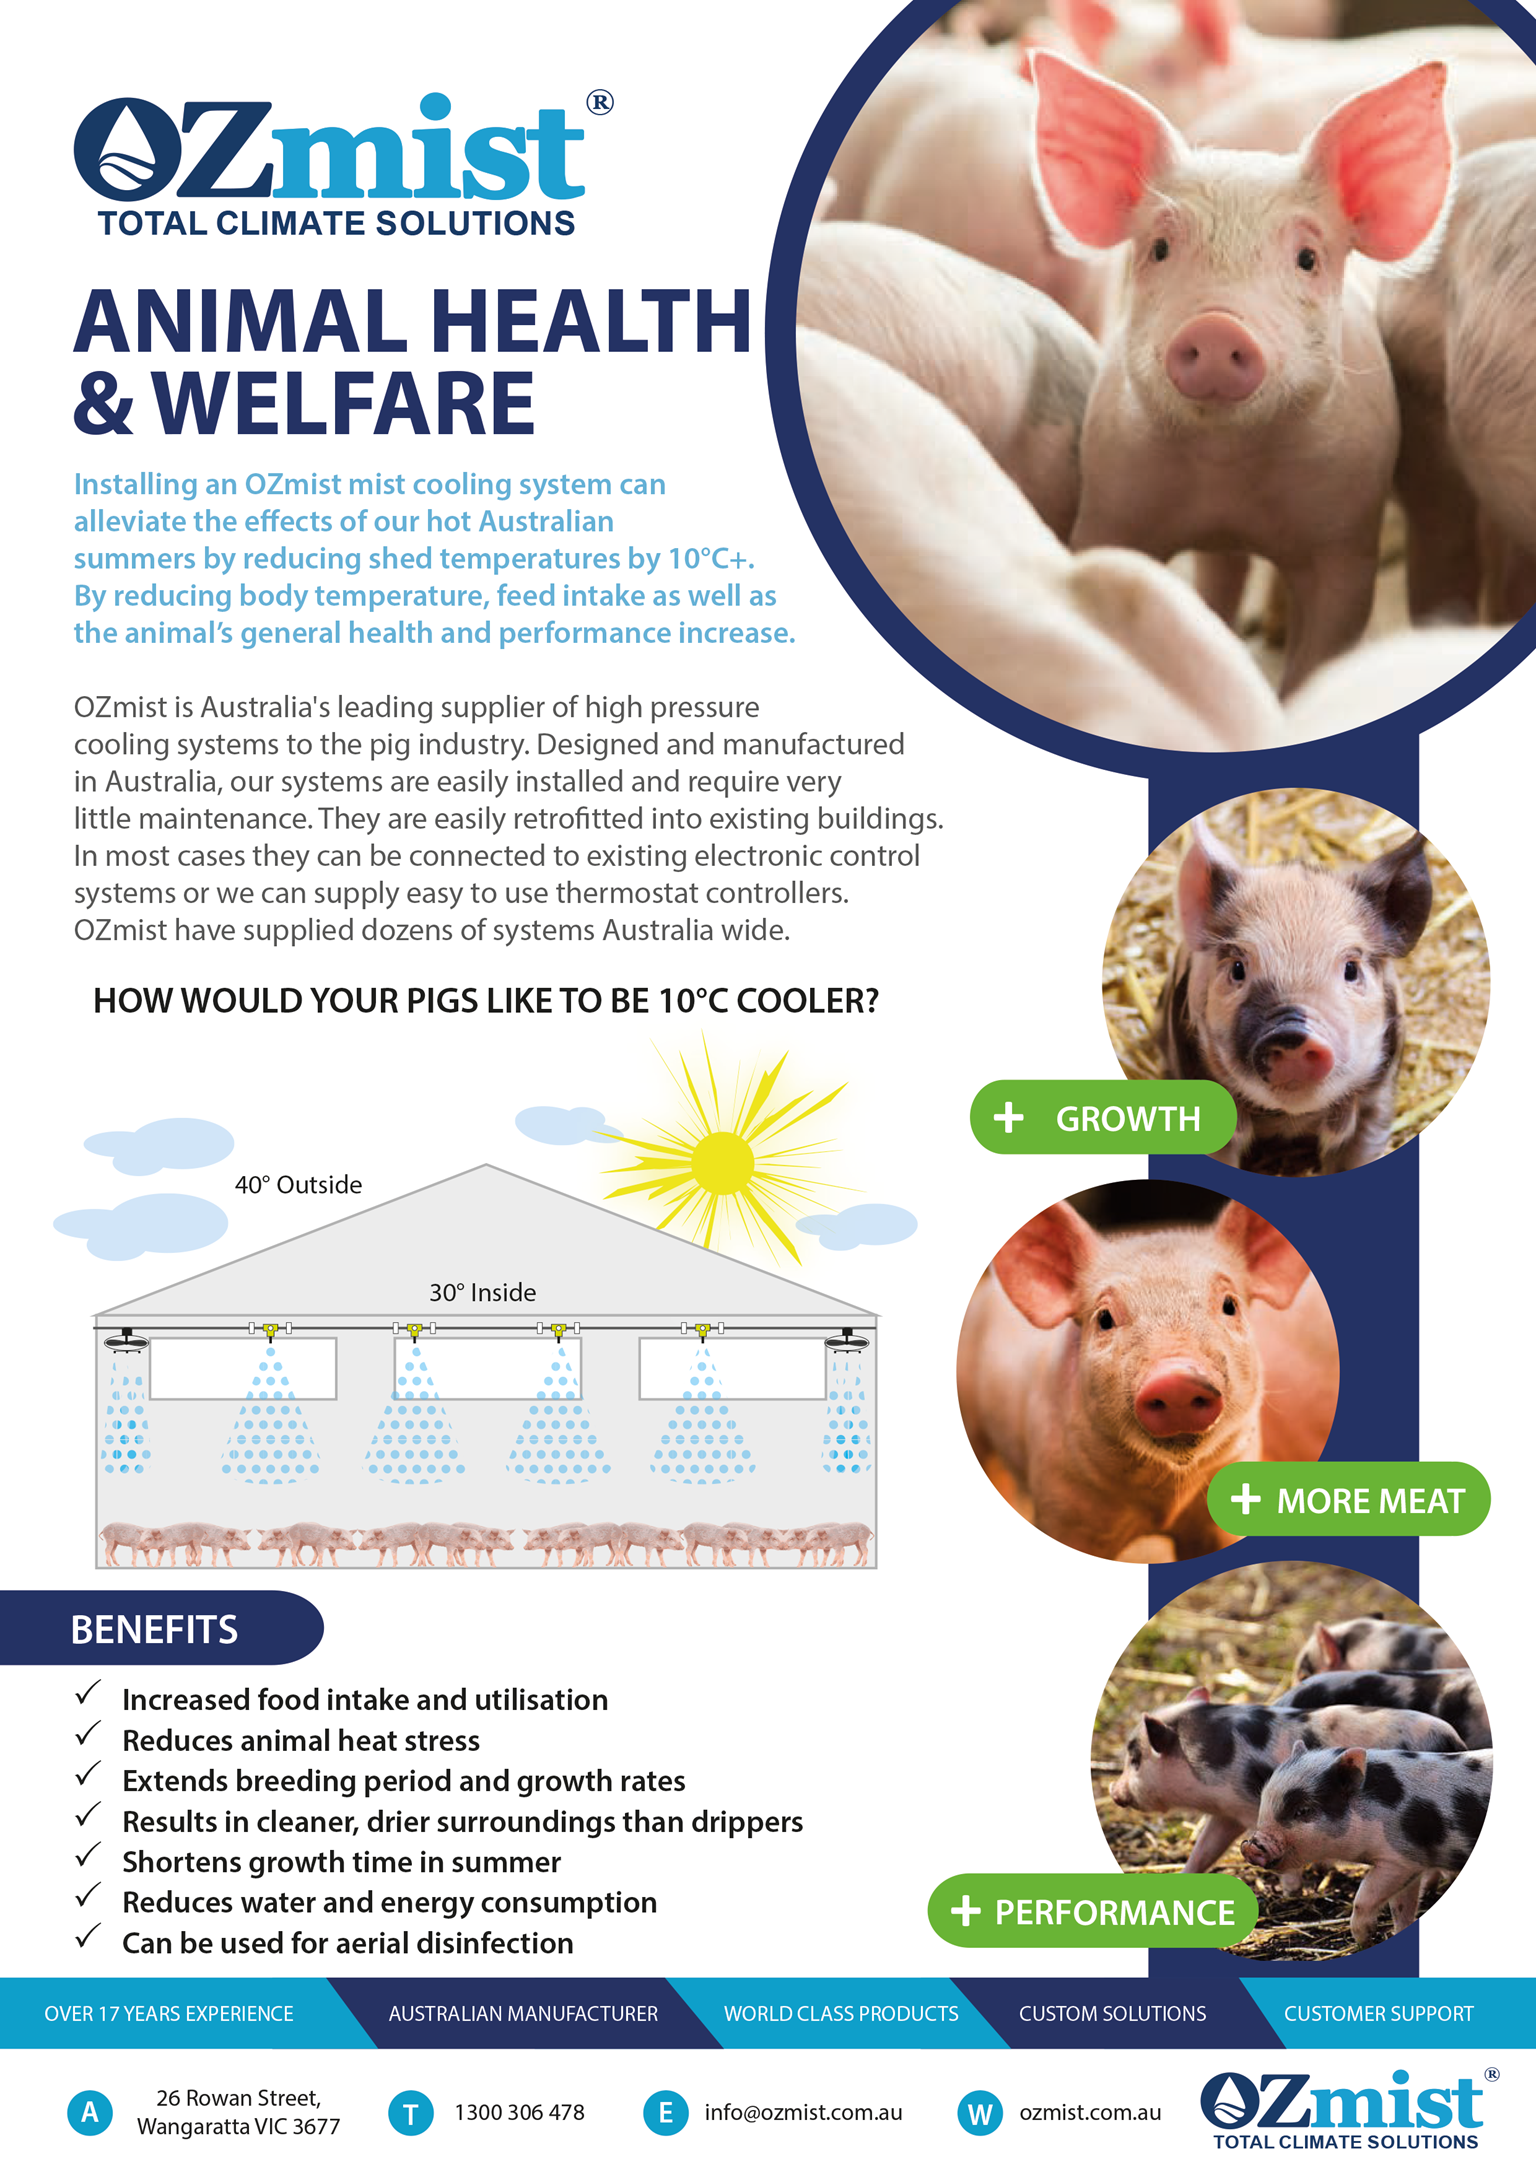 OZmist Mist Cooling System for Animal Health and Welfare